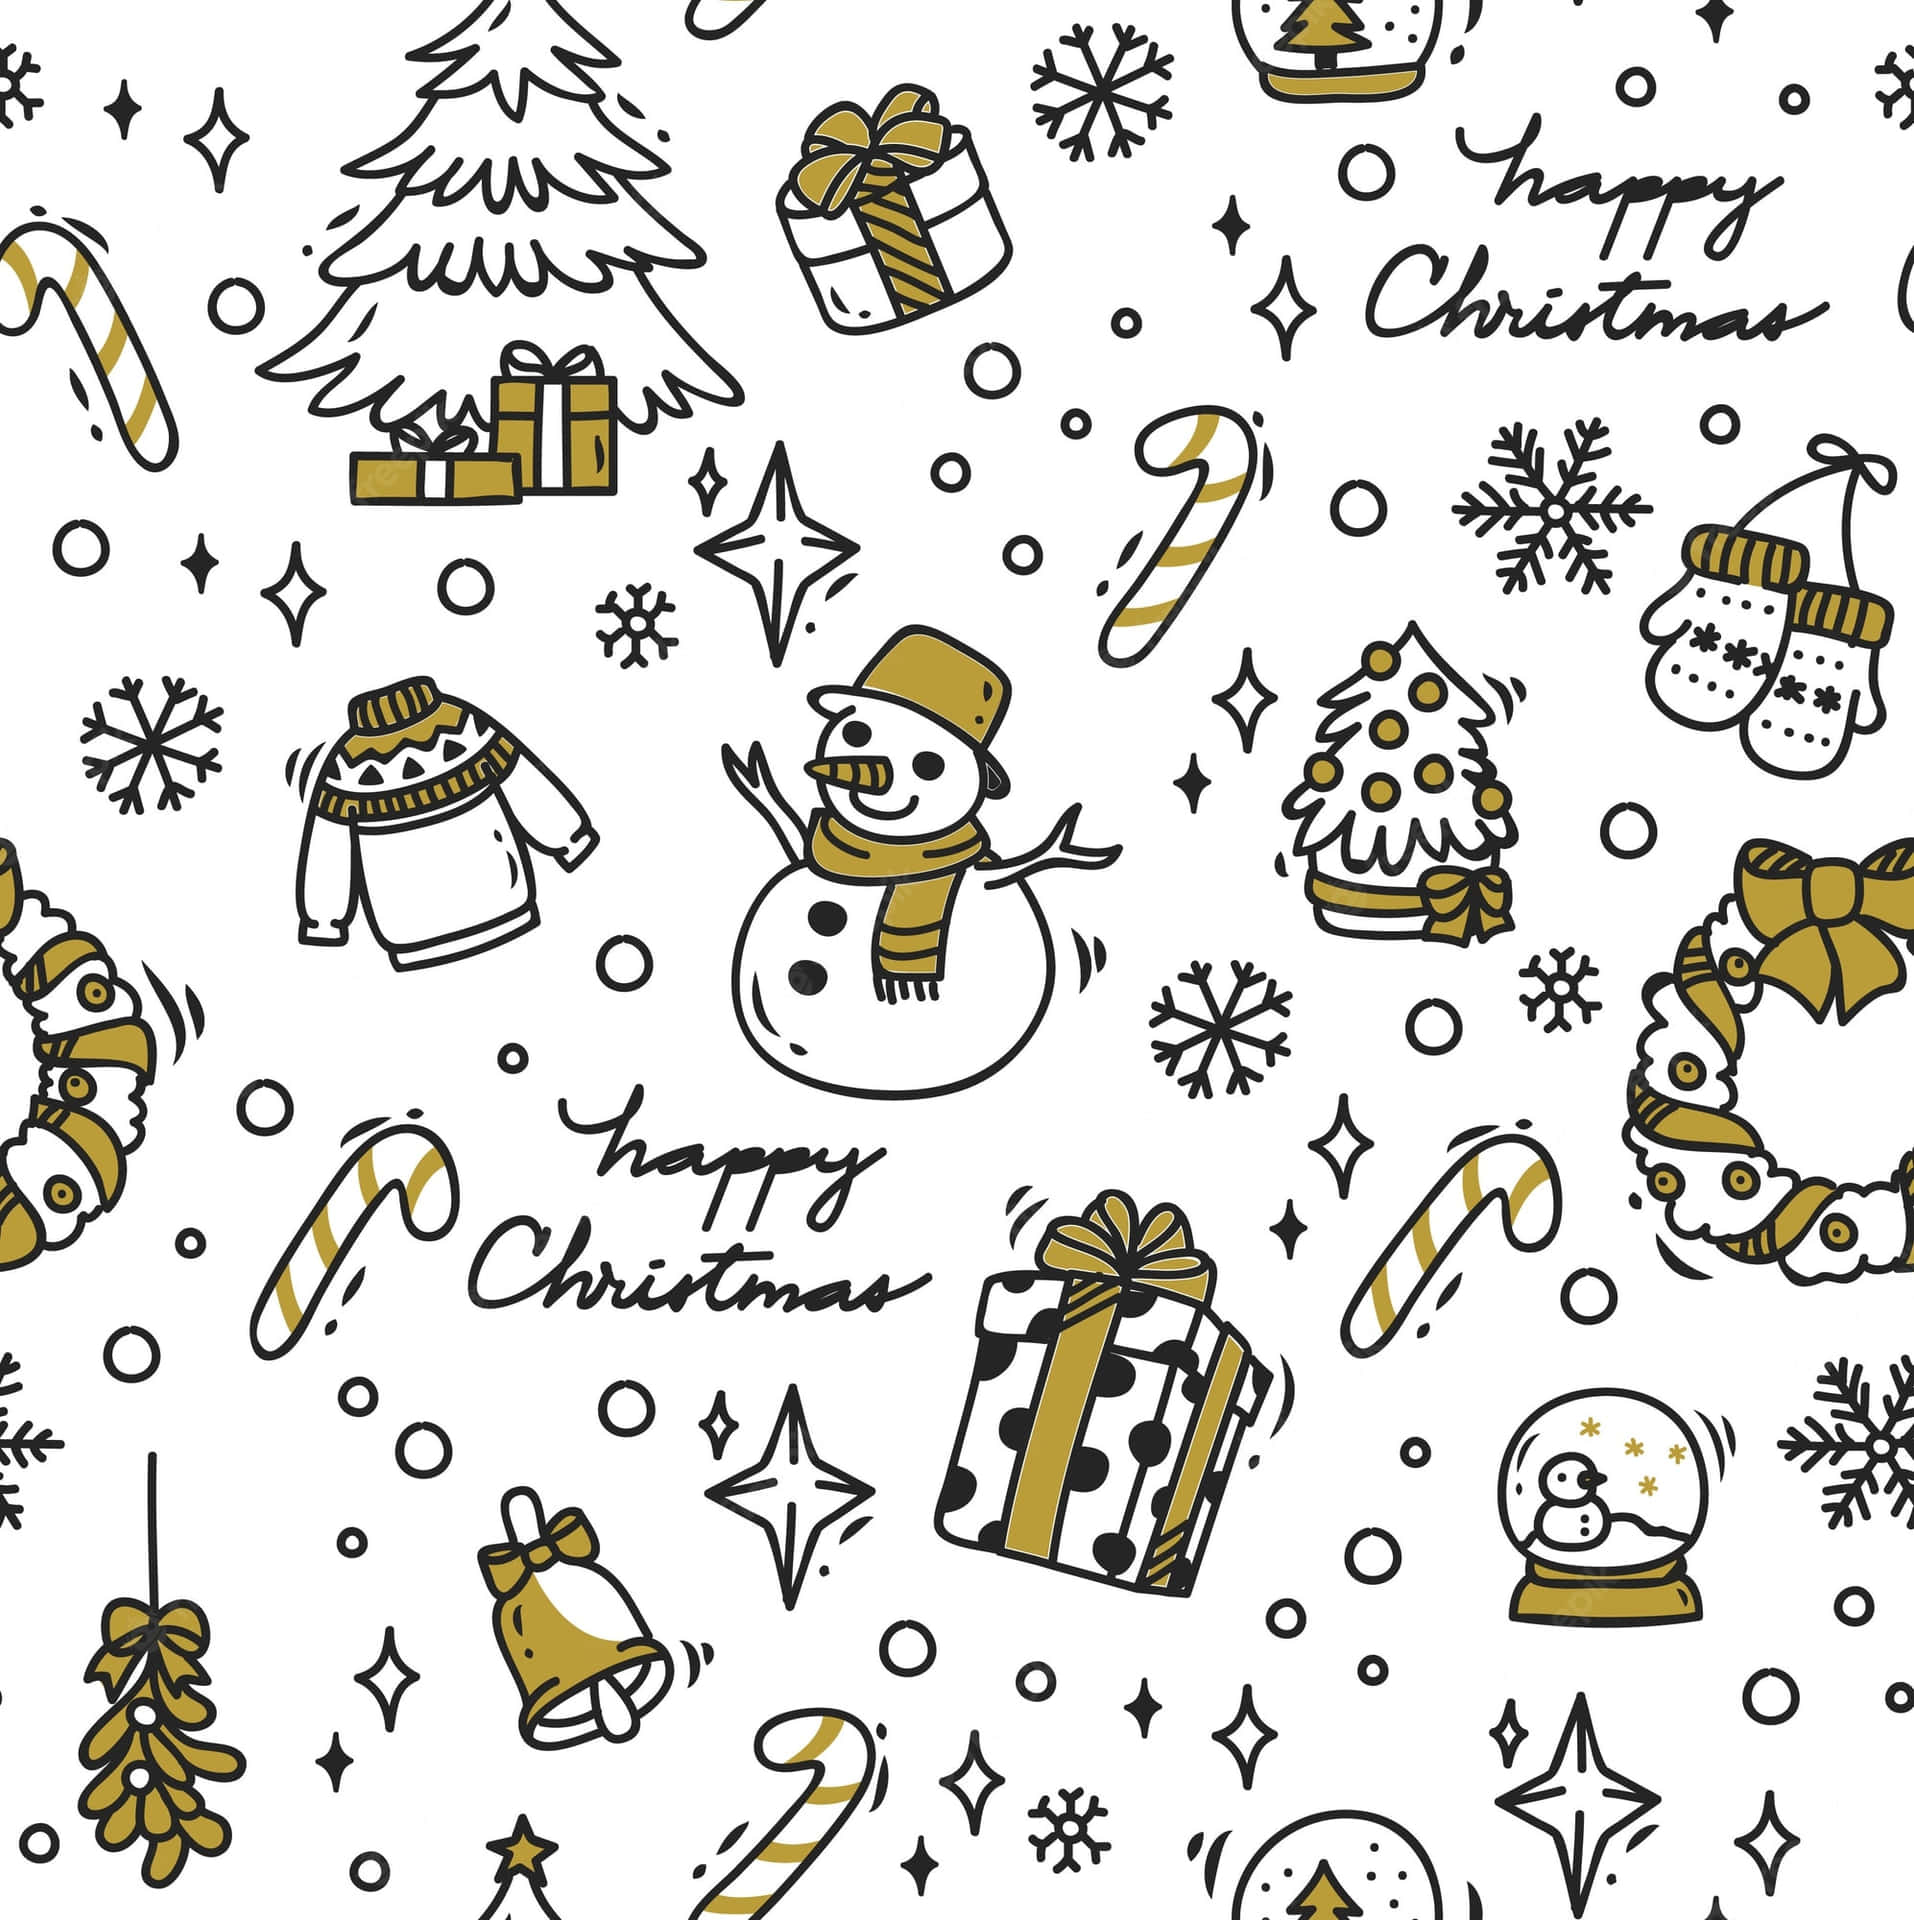 Spread the Holiday Spirit with this Cute Christmas Wallpaper